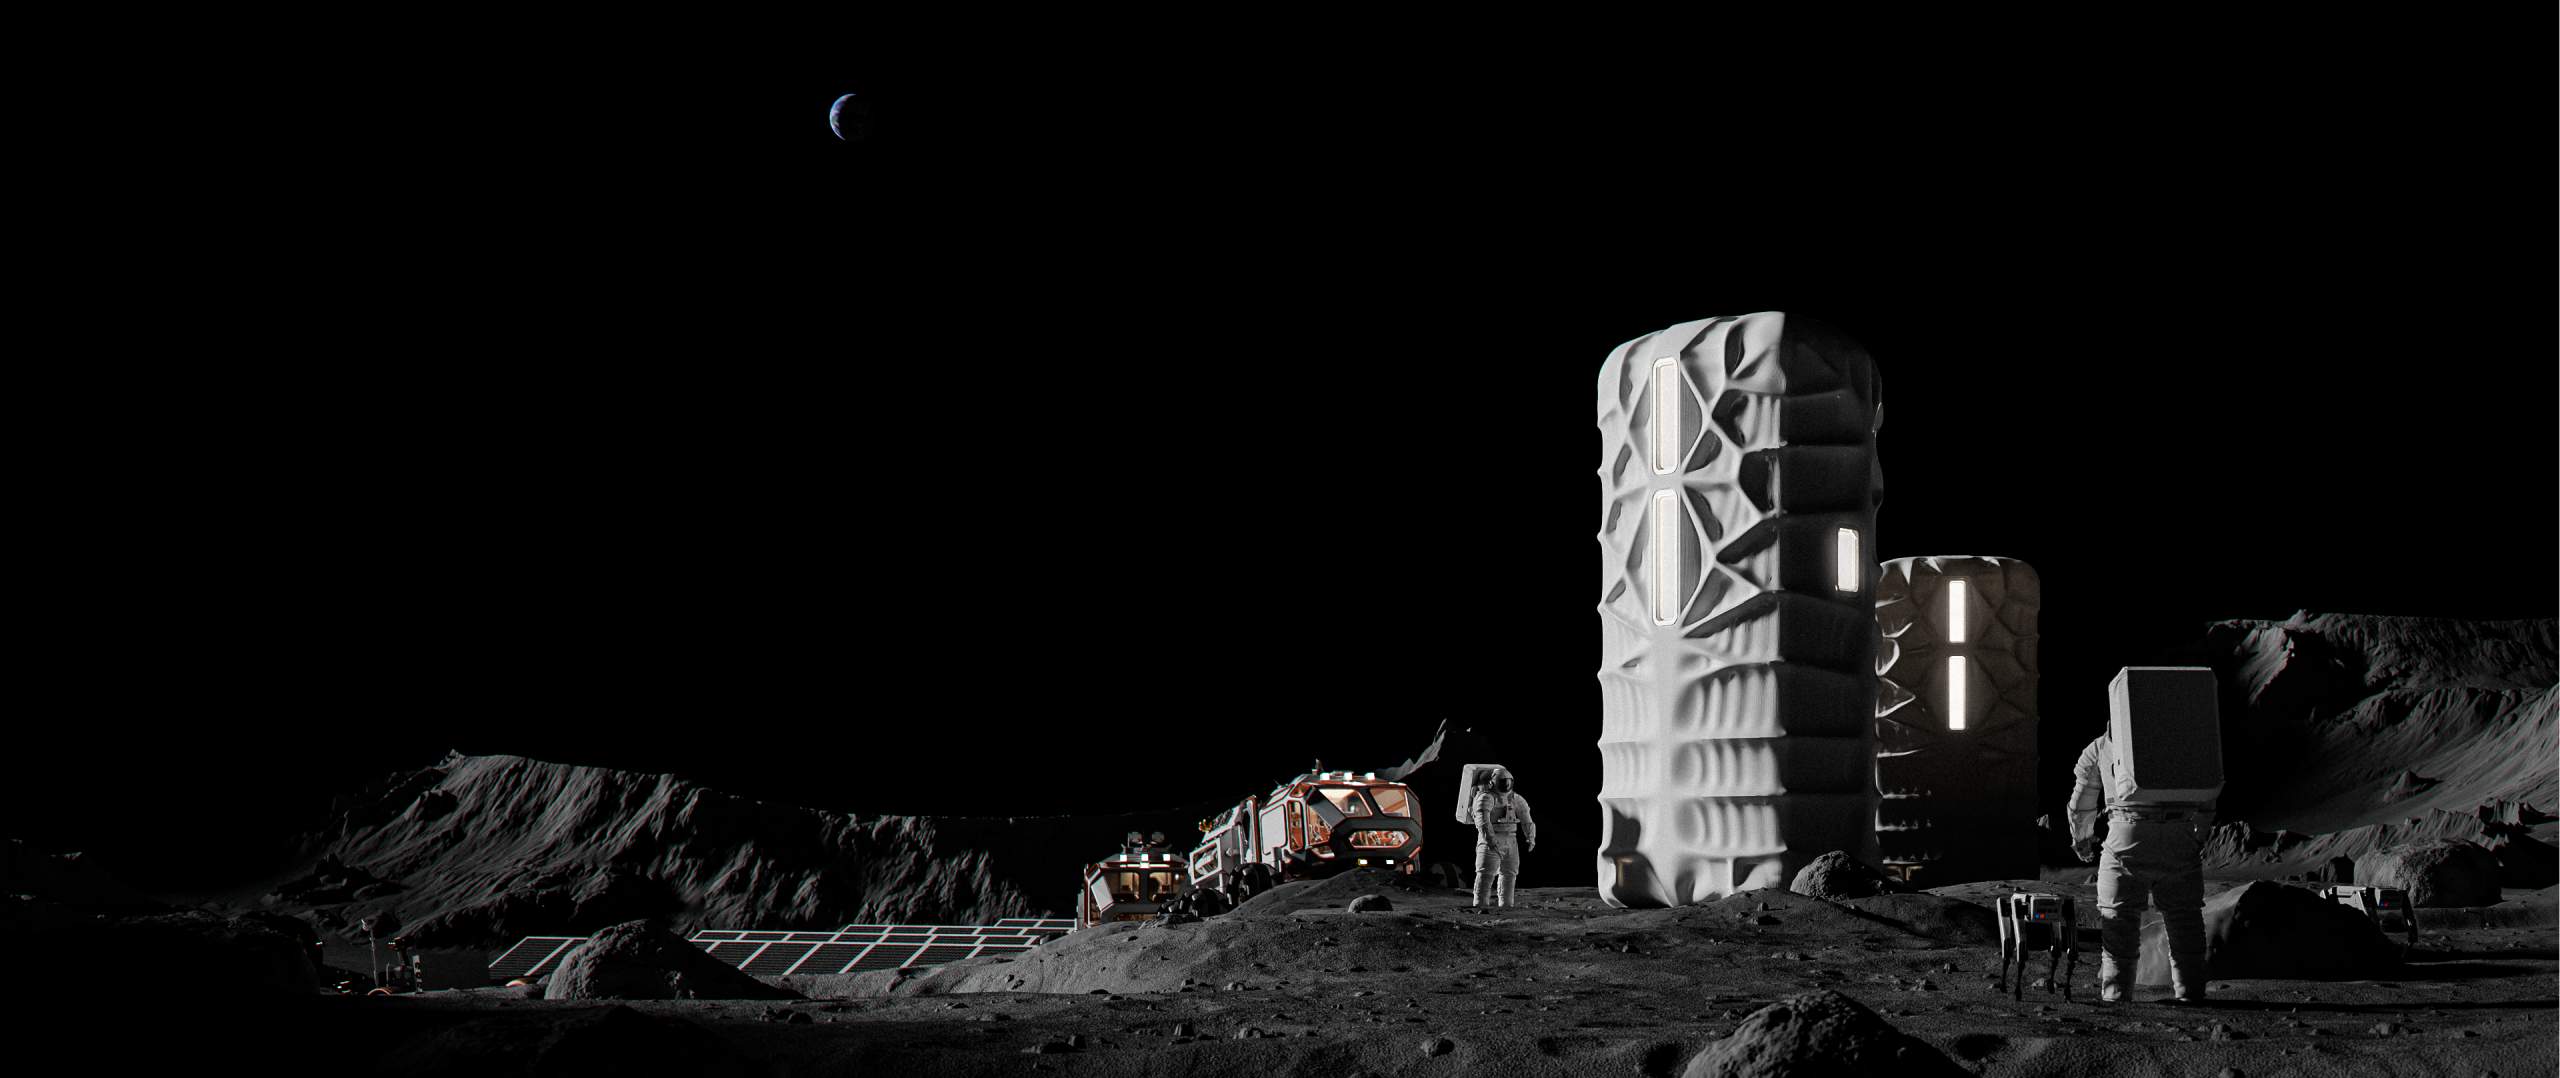 A rendering of the habitat on the moon